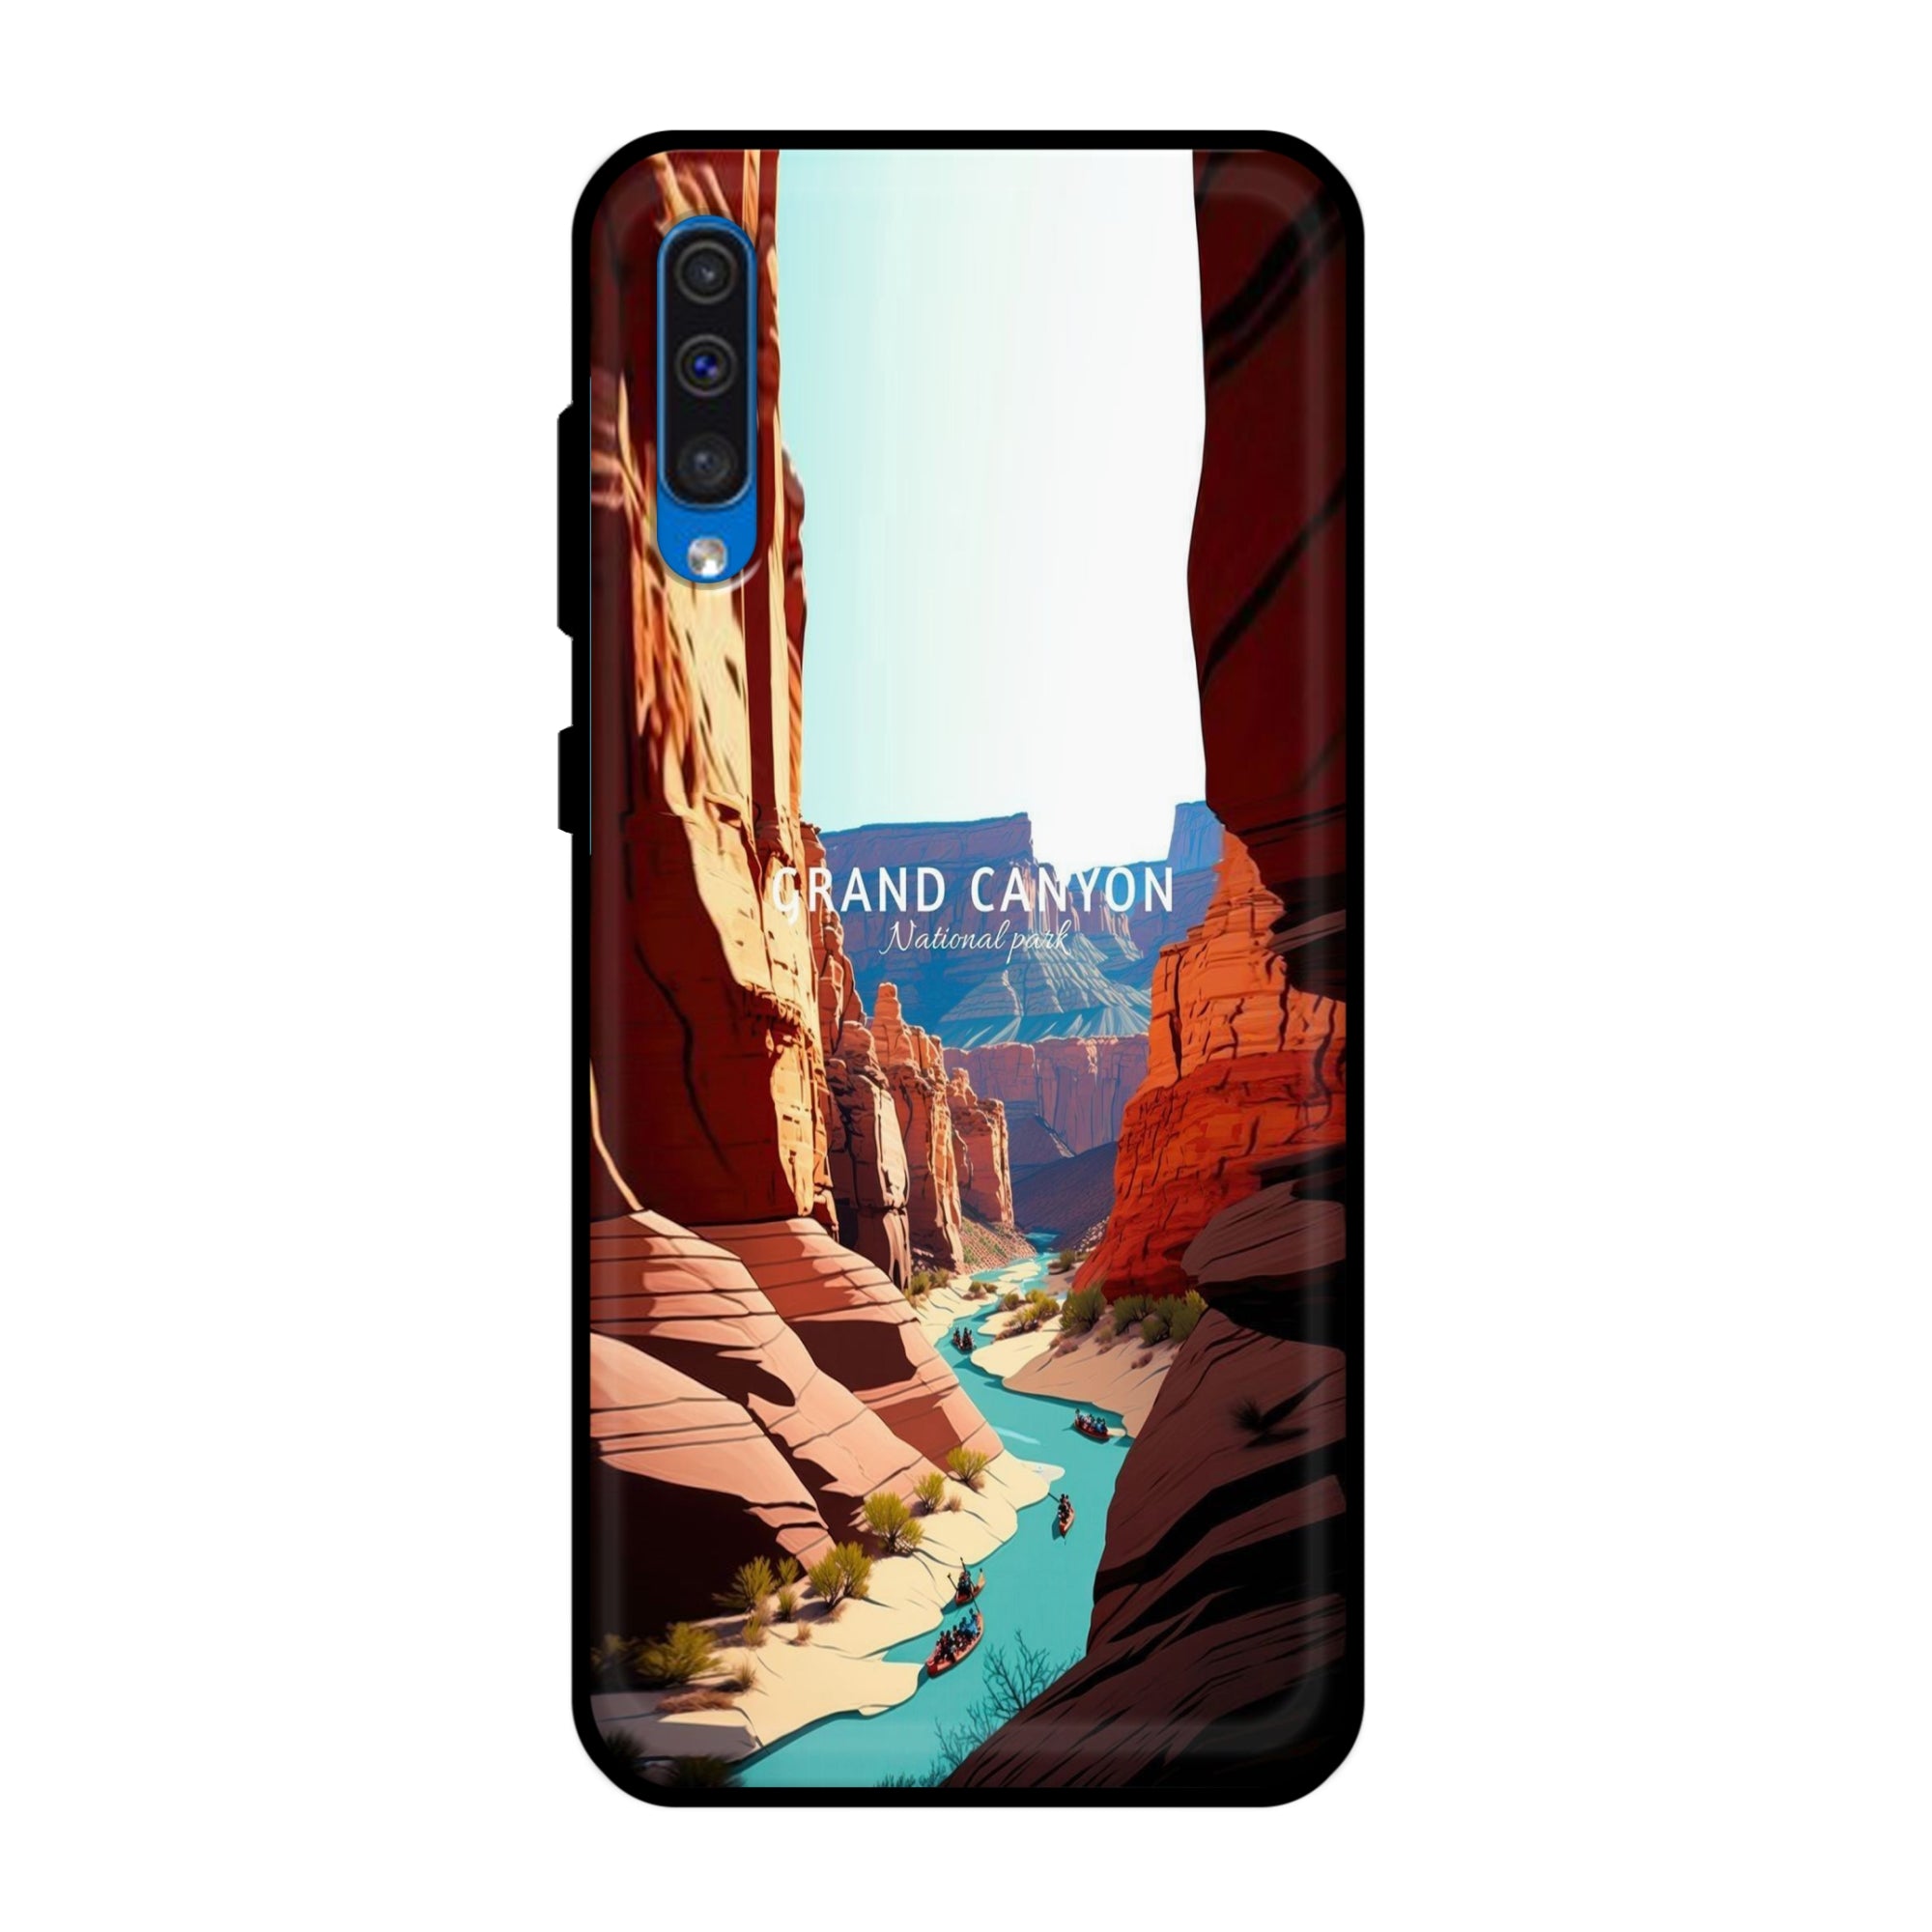 Buy Grand Canyan Metal-Silicon Back Mobile Phone Case/Cover For Samsung Galaxy A50 / A50s / A30s Online